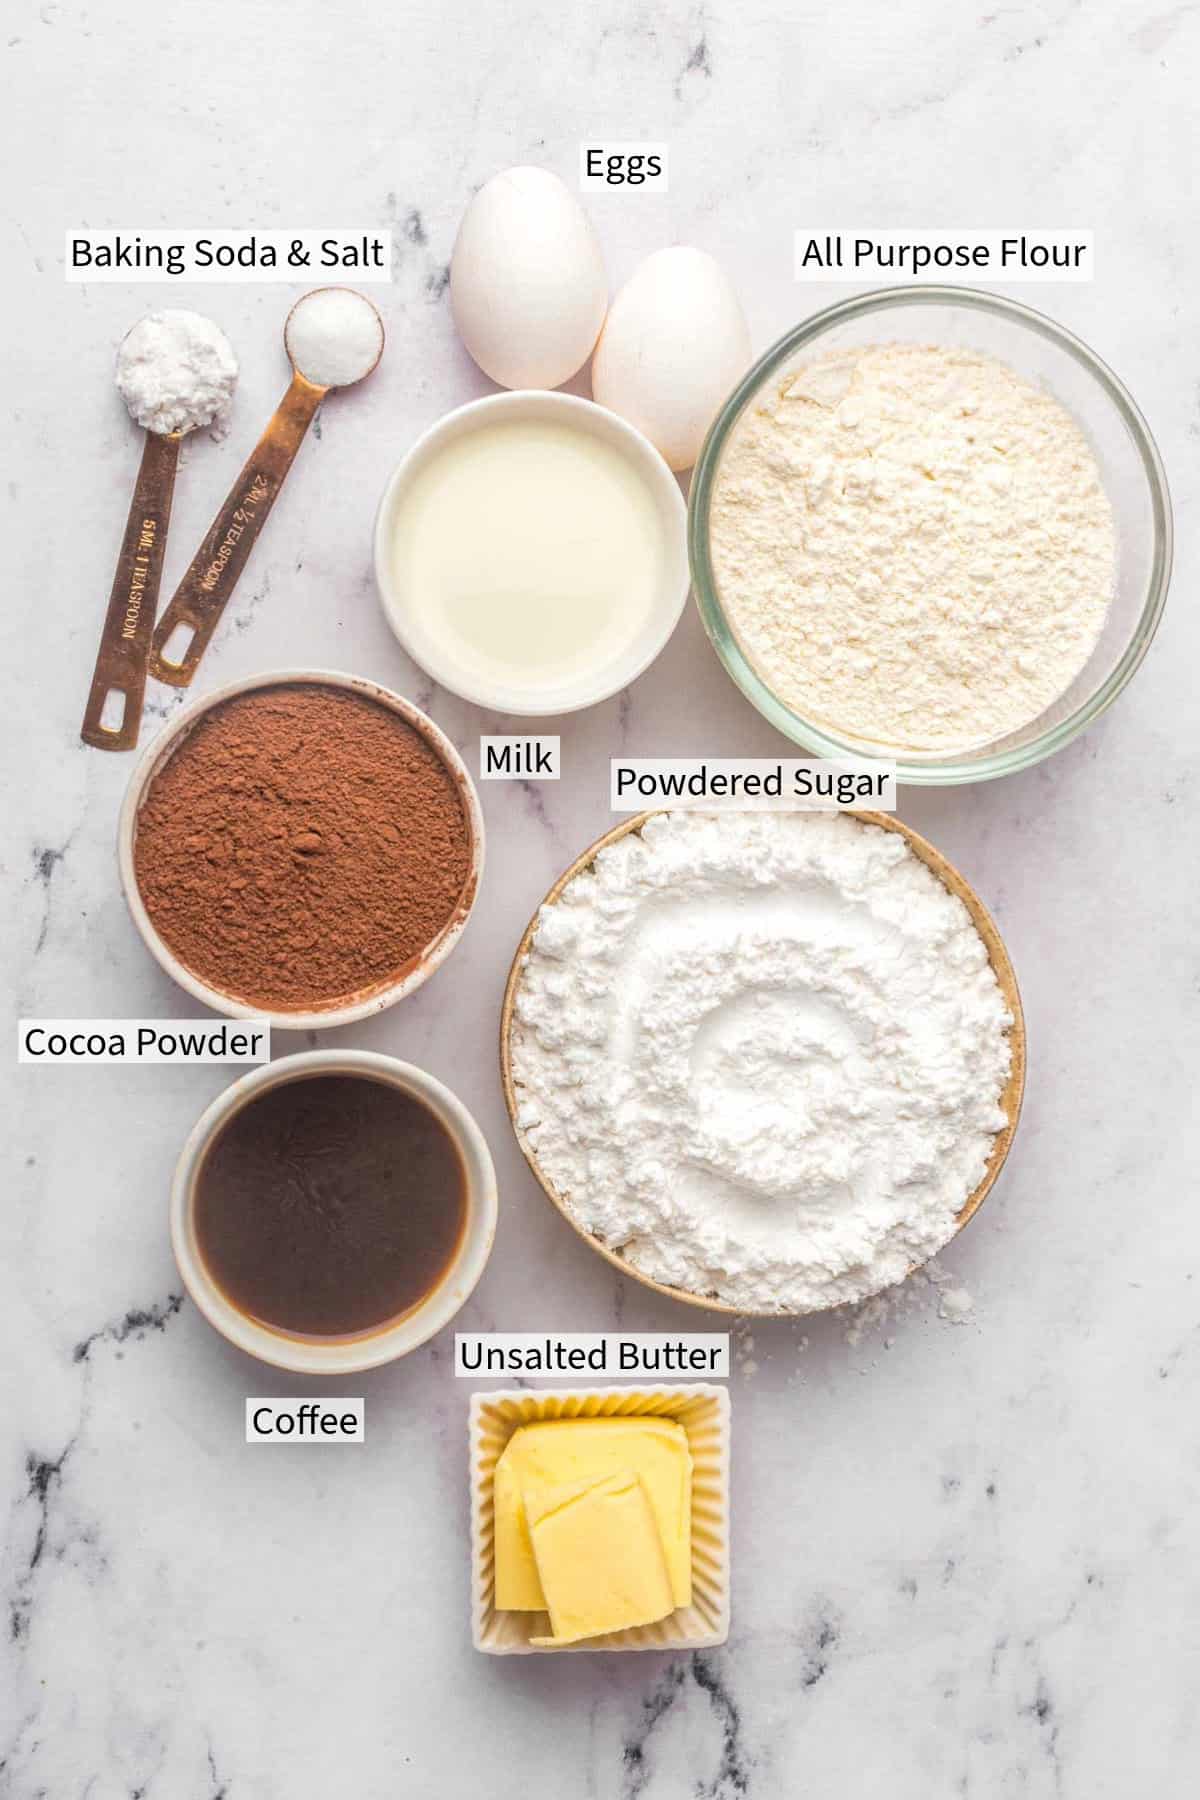 Ingredients for a Matilda Chocolate Cake: eggs, all-purpose flour, baking soda and salt, milk, powdered sugar, cocoa powder, coffee, and unsalted butter.